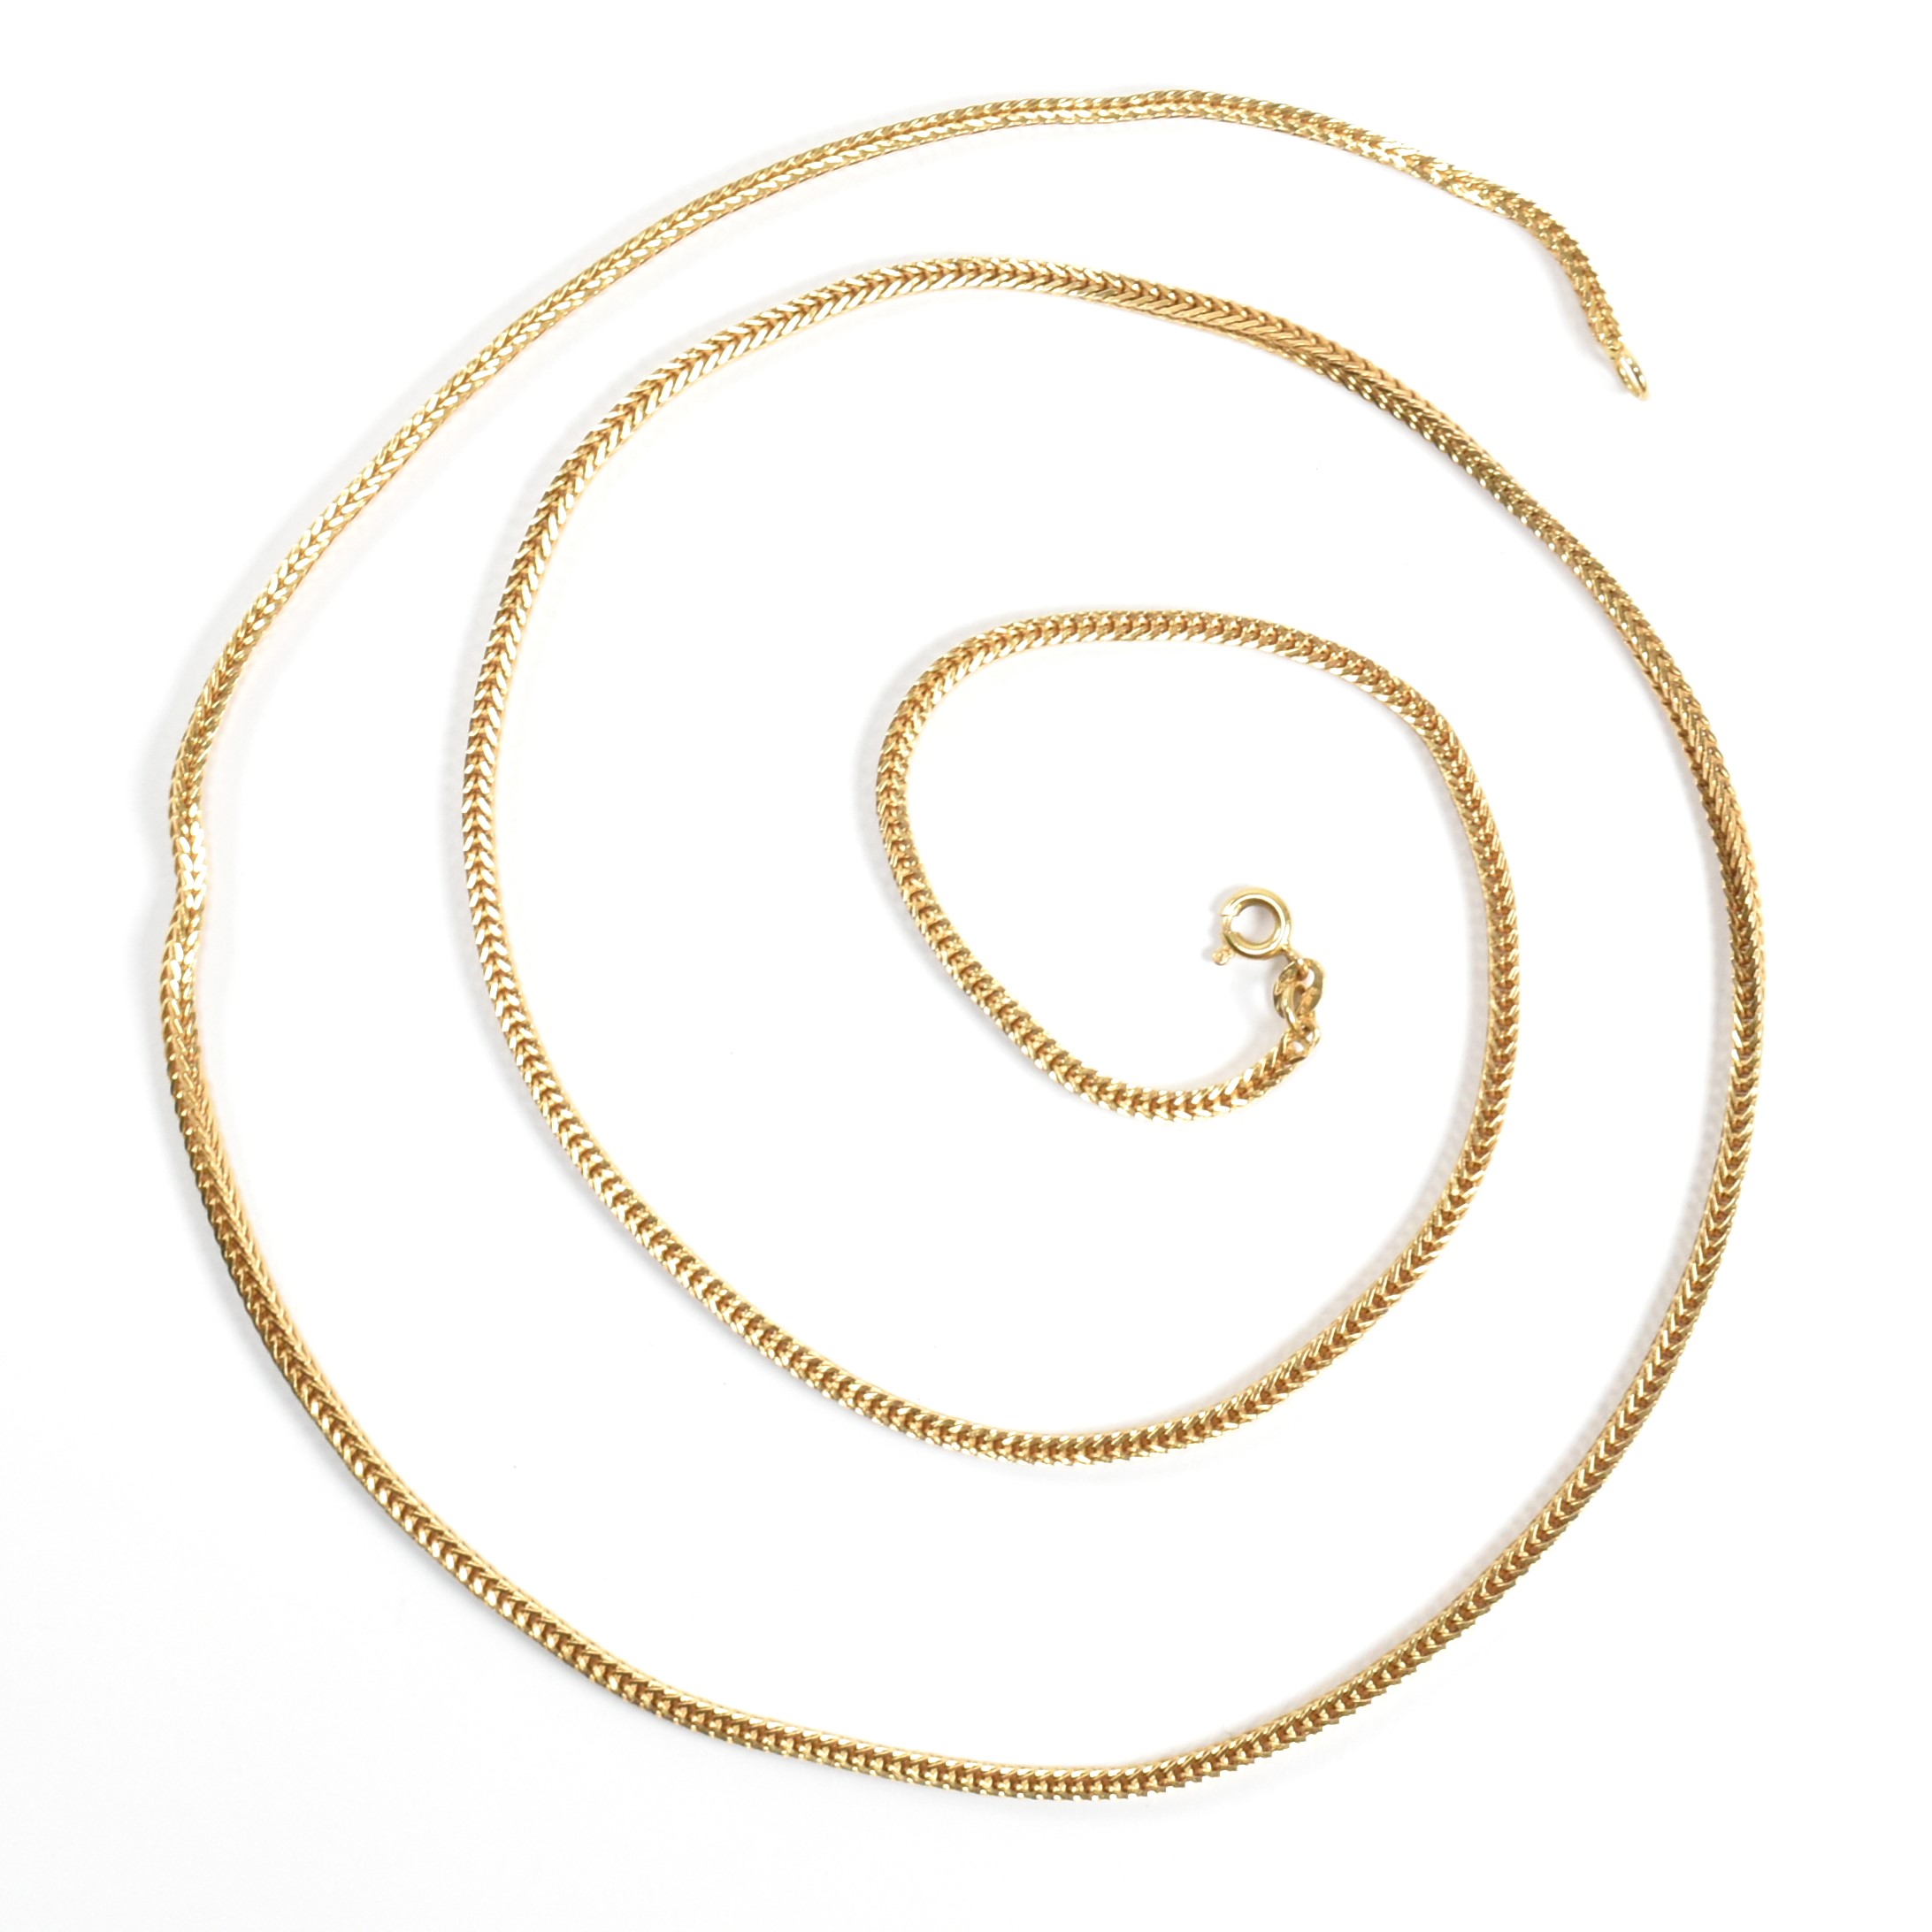 ITALIAN 18CT GOLD SNAKE CHAIN NECKLACE - Image 3 of 4